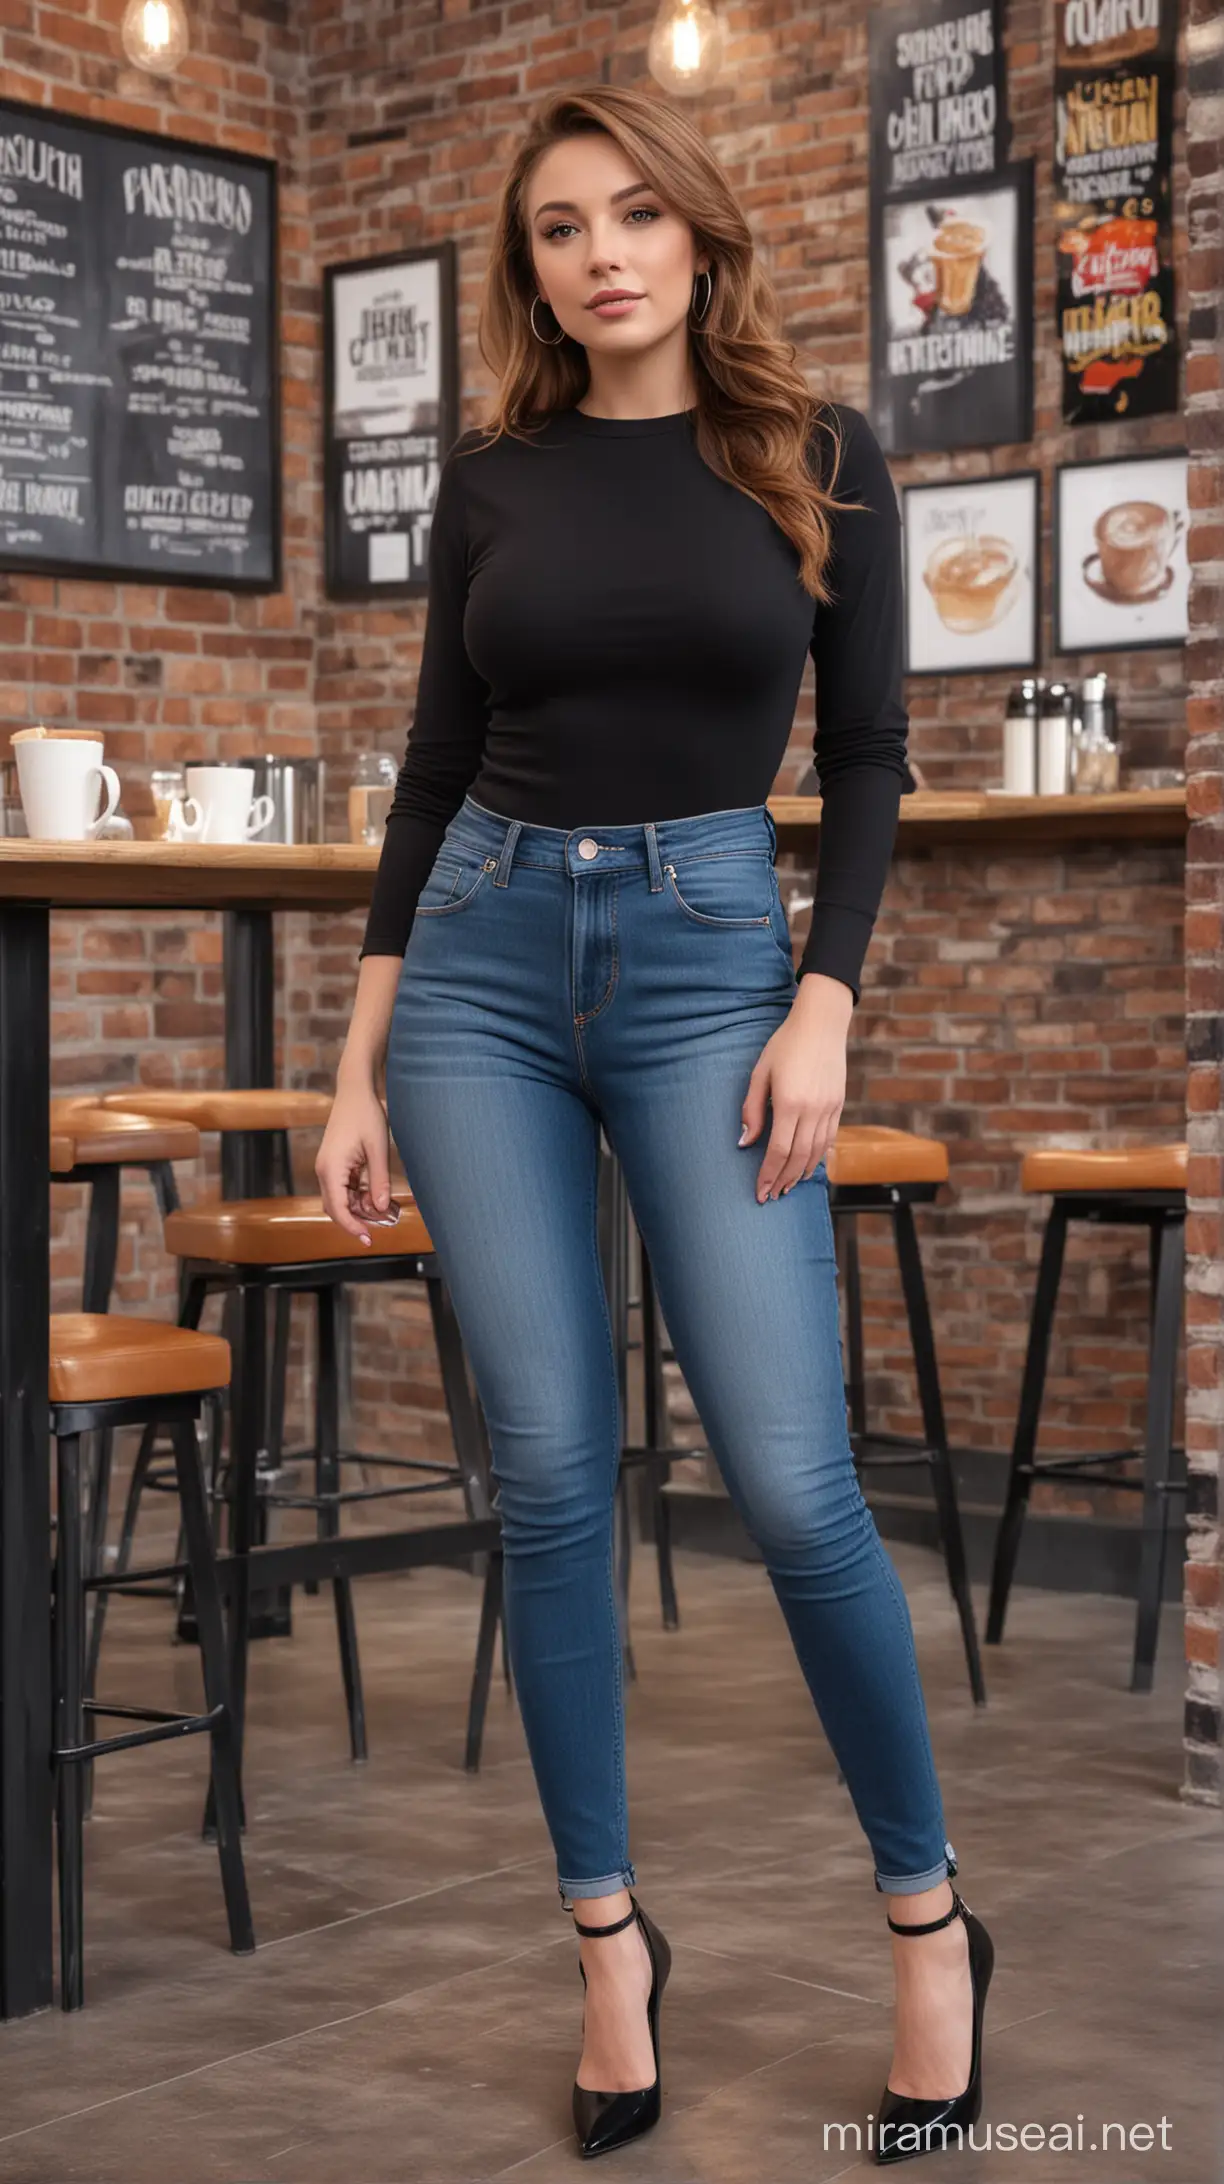 4k Ai art front view beautiful USA girl ear tops high heels multiple colour jeans and black full sleeve shirt in USA coffee shop